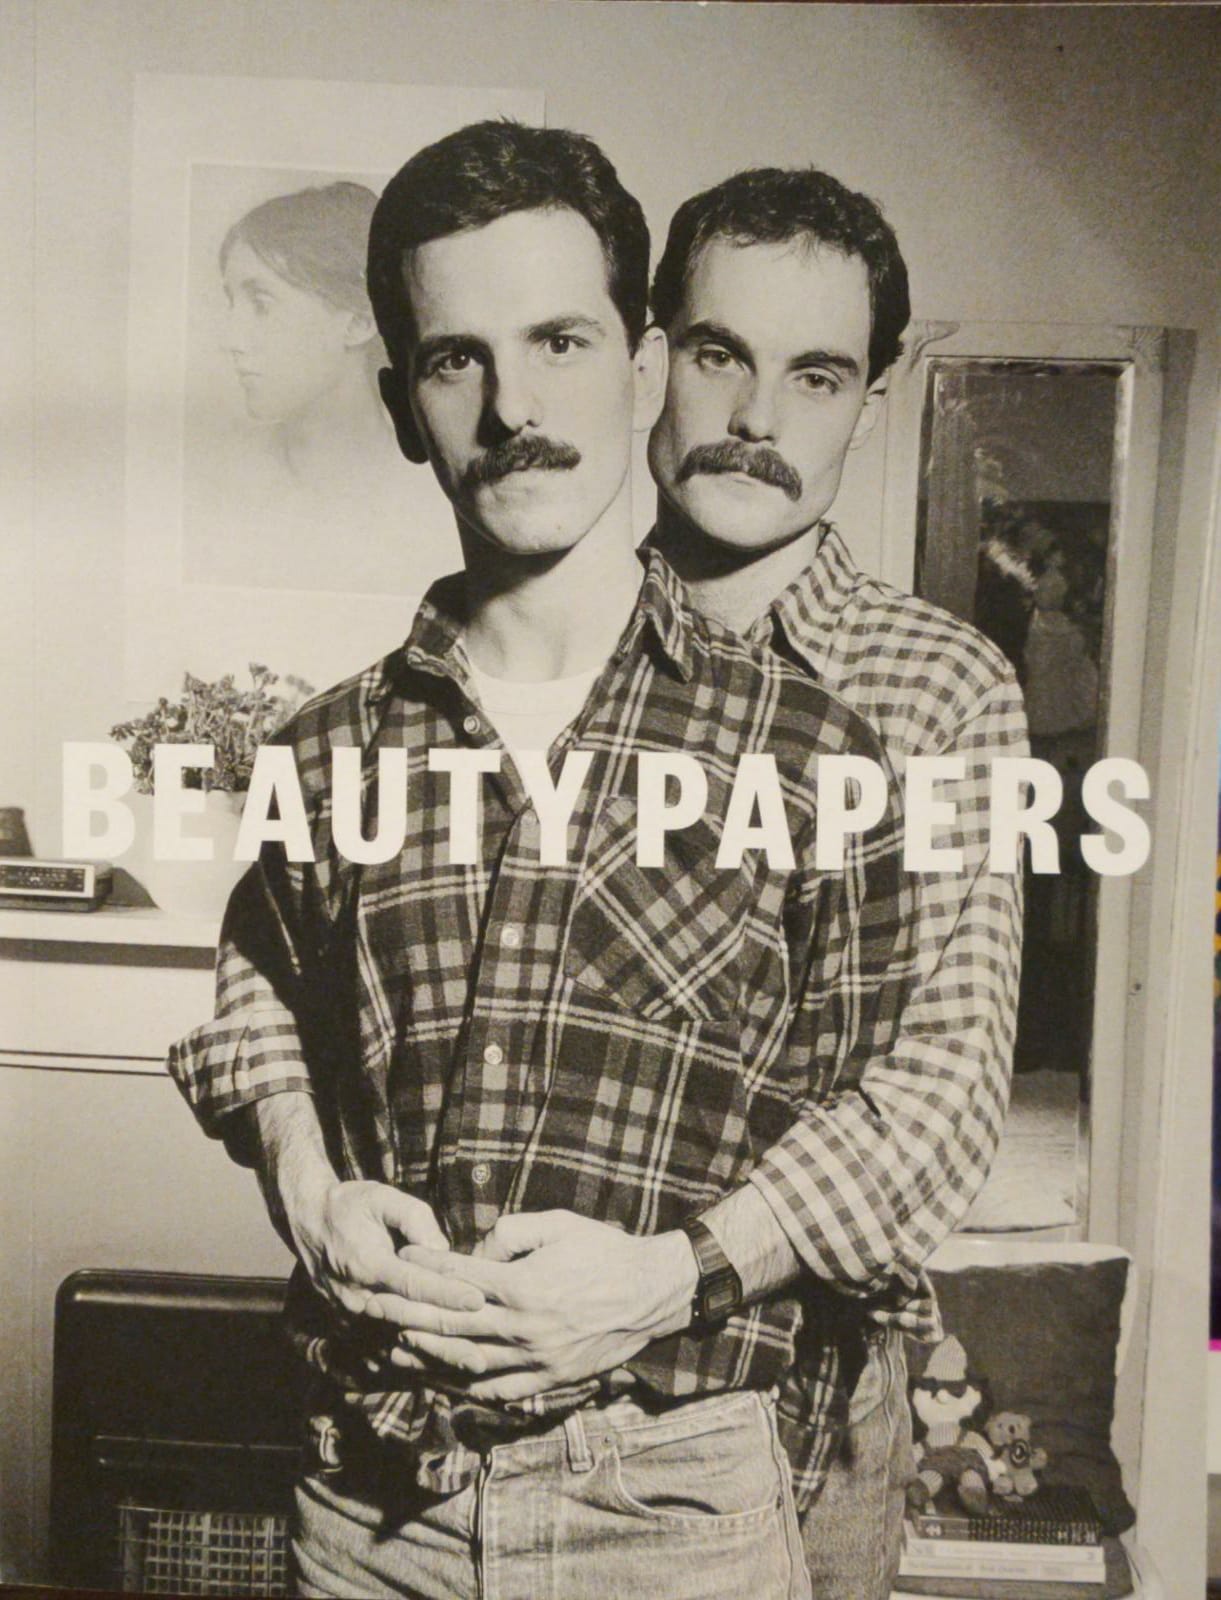 Beauty Papers Magazine